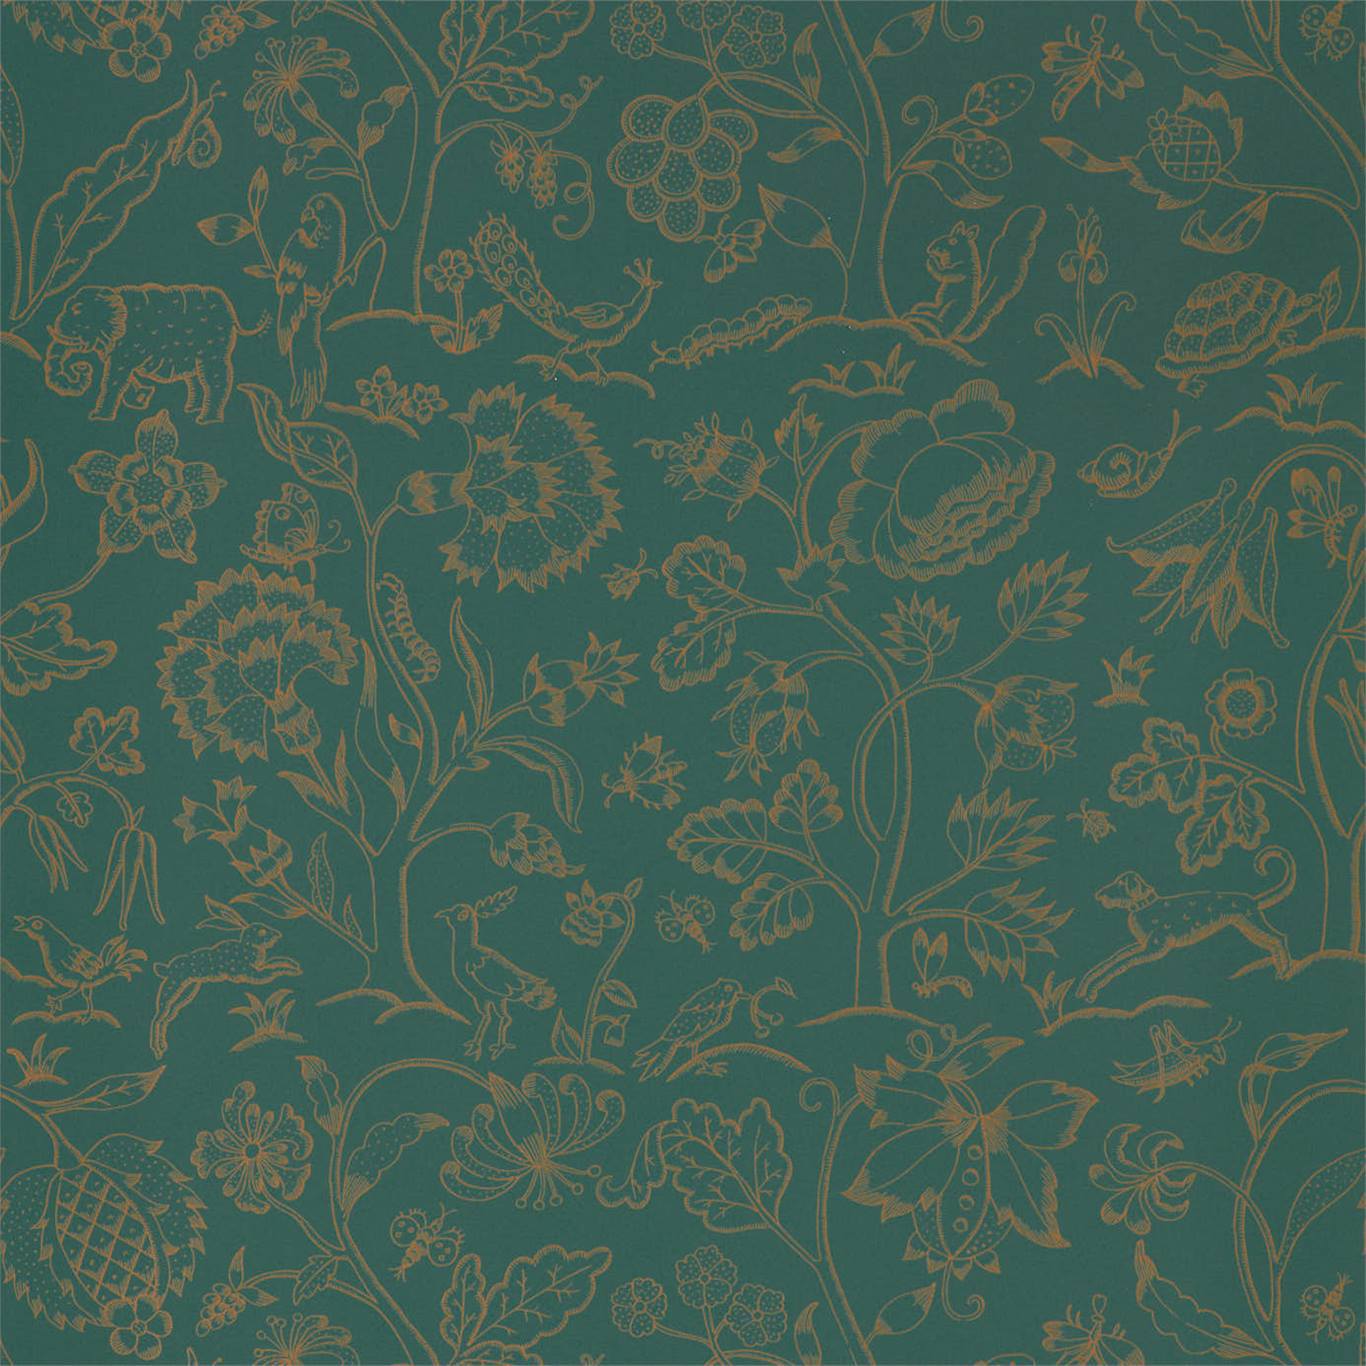 Middlemore Moss Gold Wallpaper DMSW216695 by Morris & Co